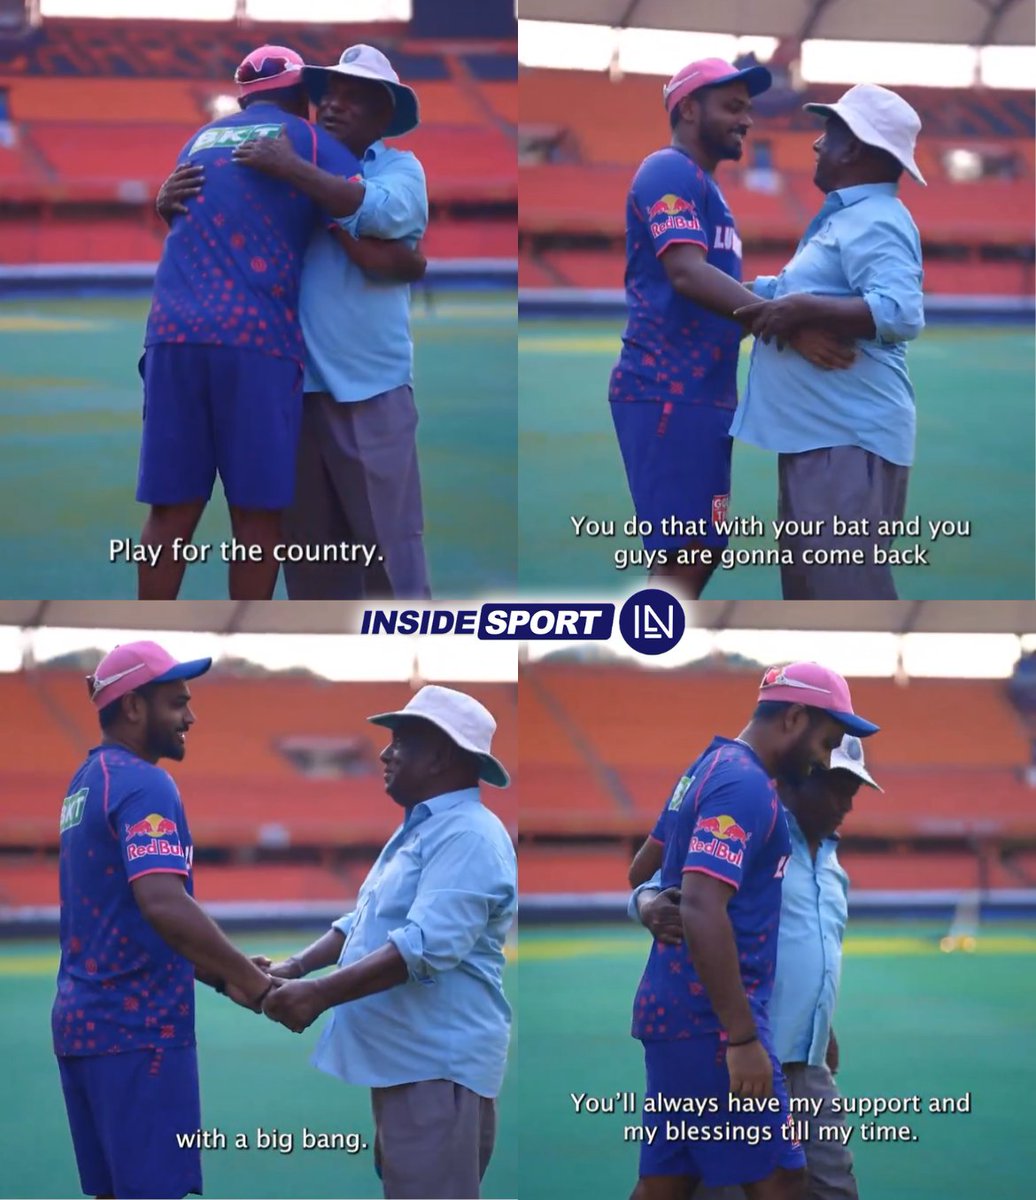 Hyderabad pitch curator congratulating Sanju Samson for getting selected in India's squad for the T20 World Cup 2024 💗 #T20WorldCup2024 #TeamIndia #SanjuSamson #CricketTwitter